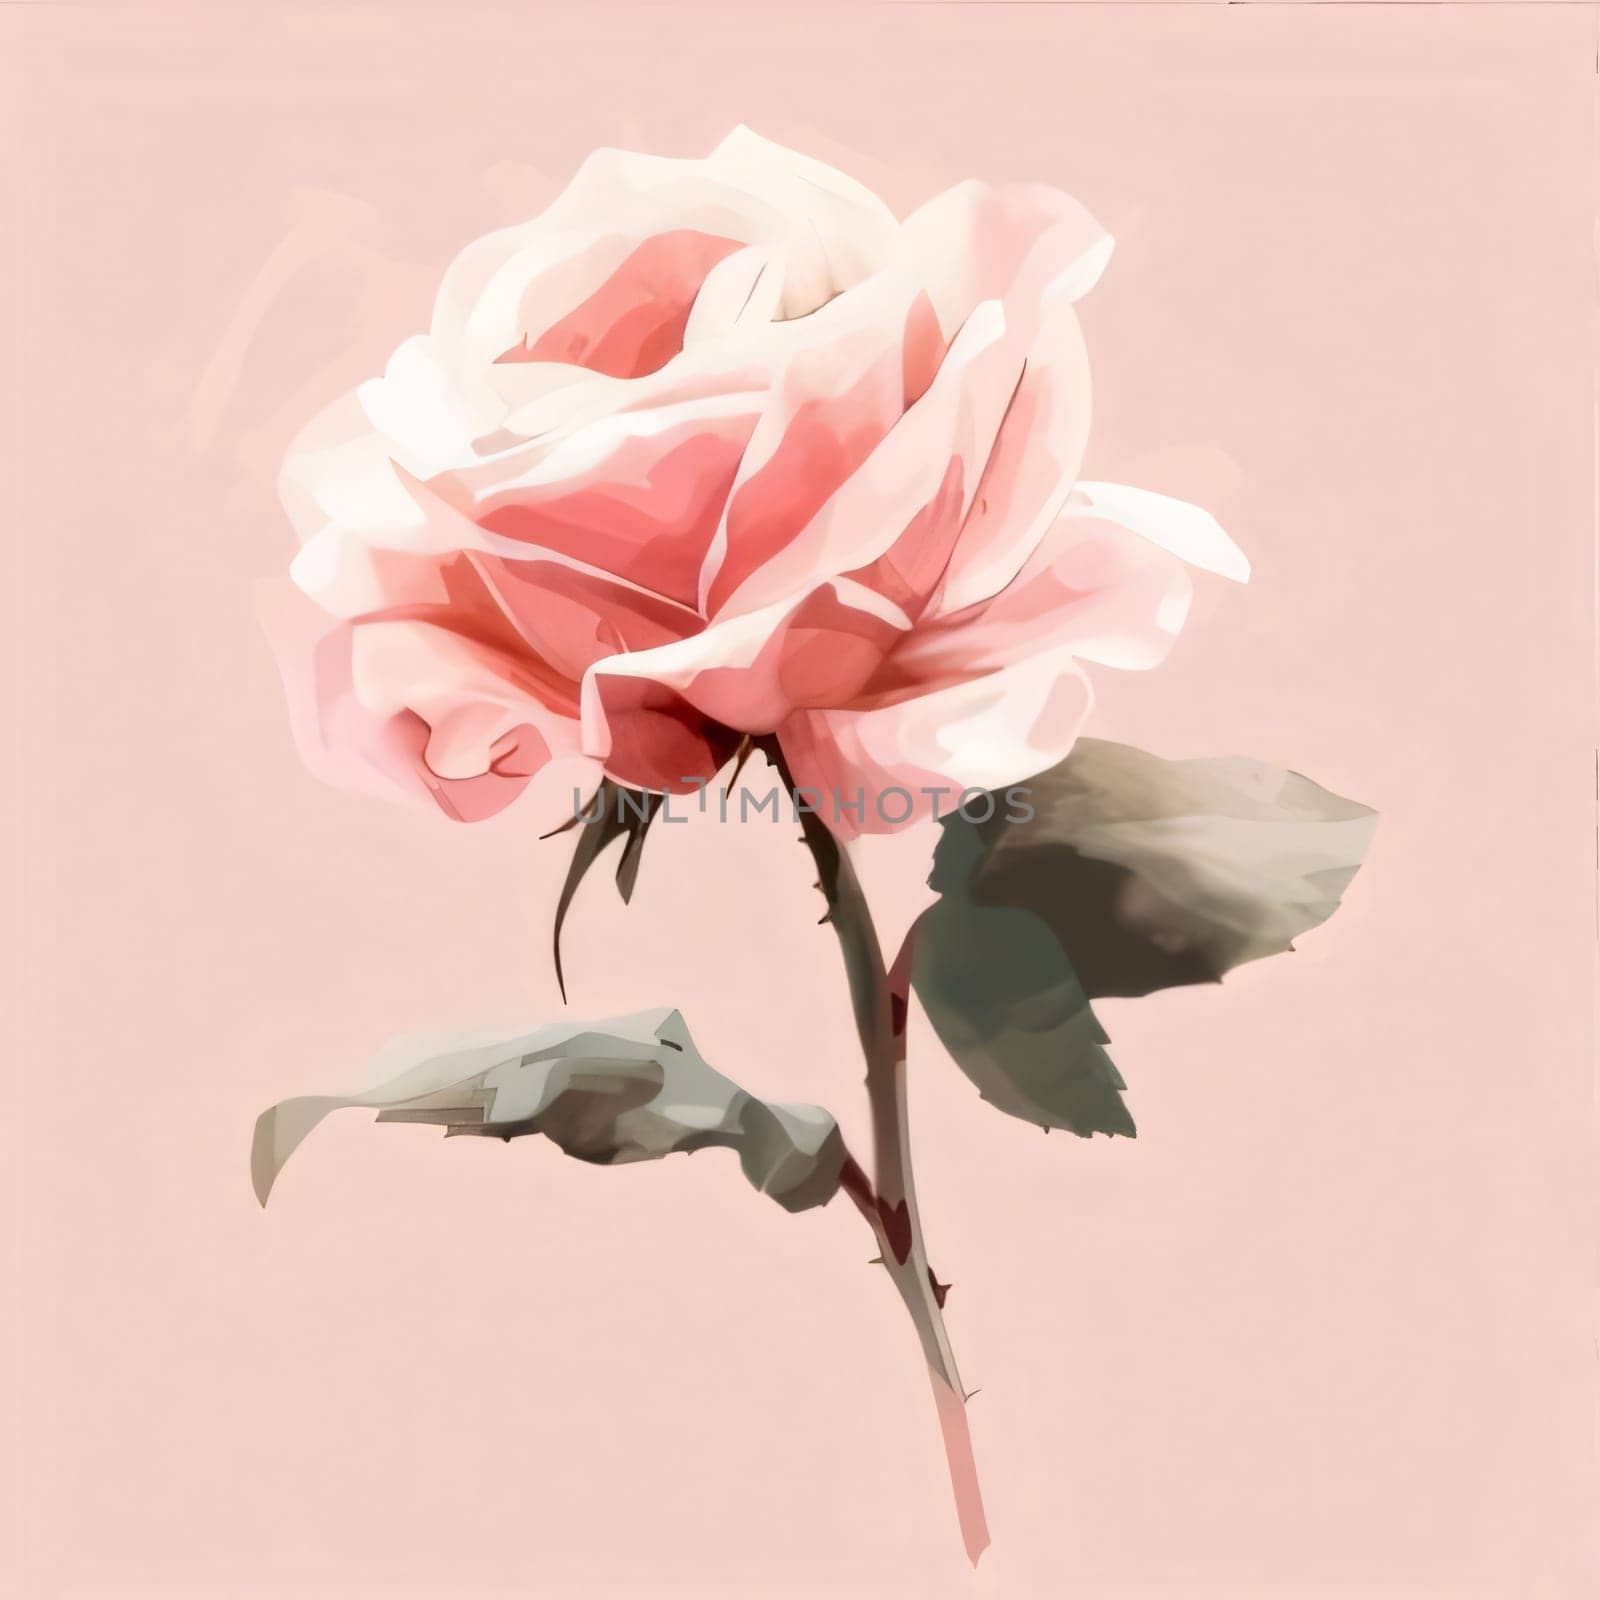 Drawn, painted pink rose on a light background. Flowering flowers, a symbol of spring, new life. by ThemesS